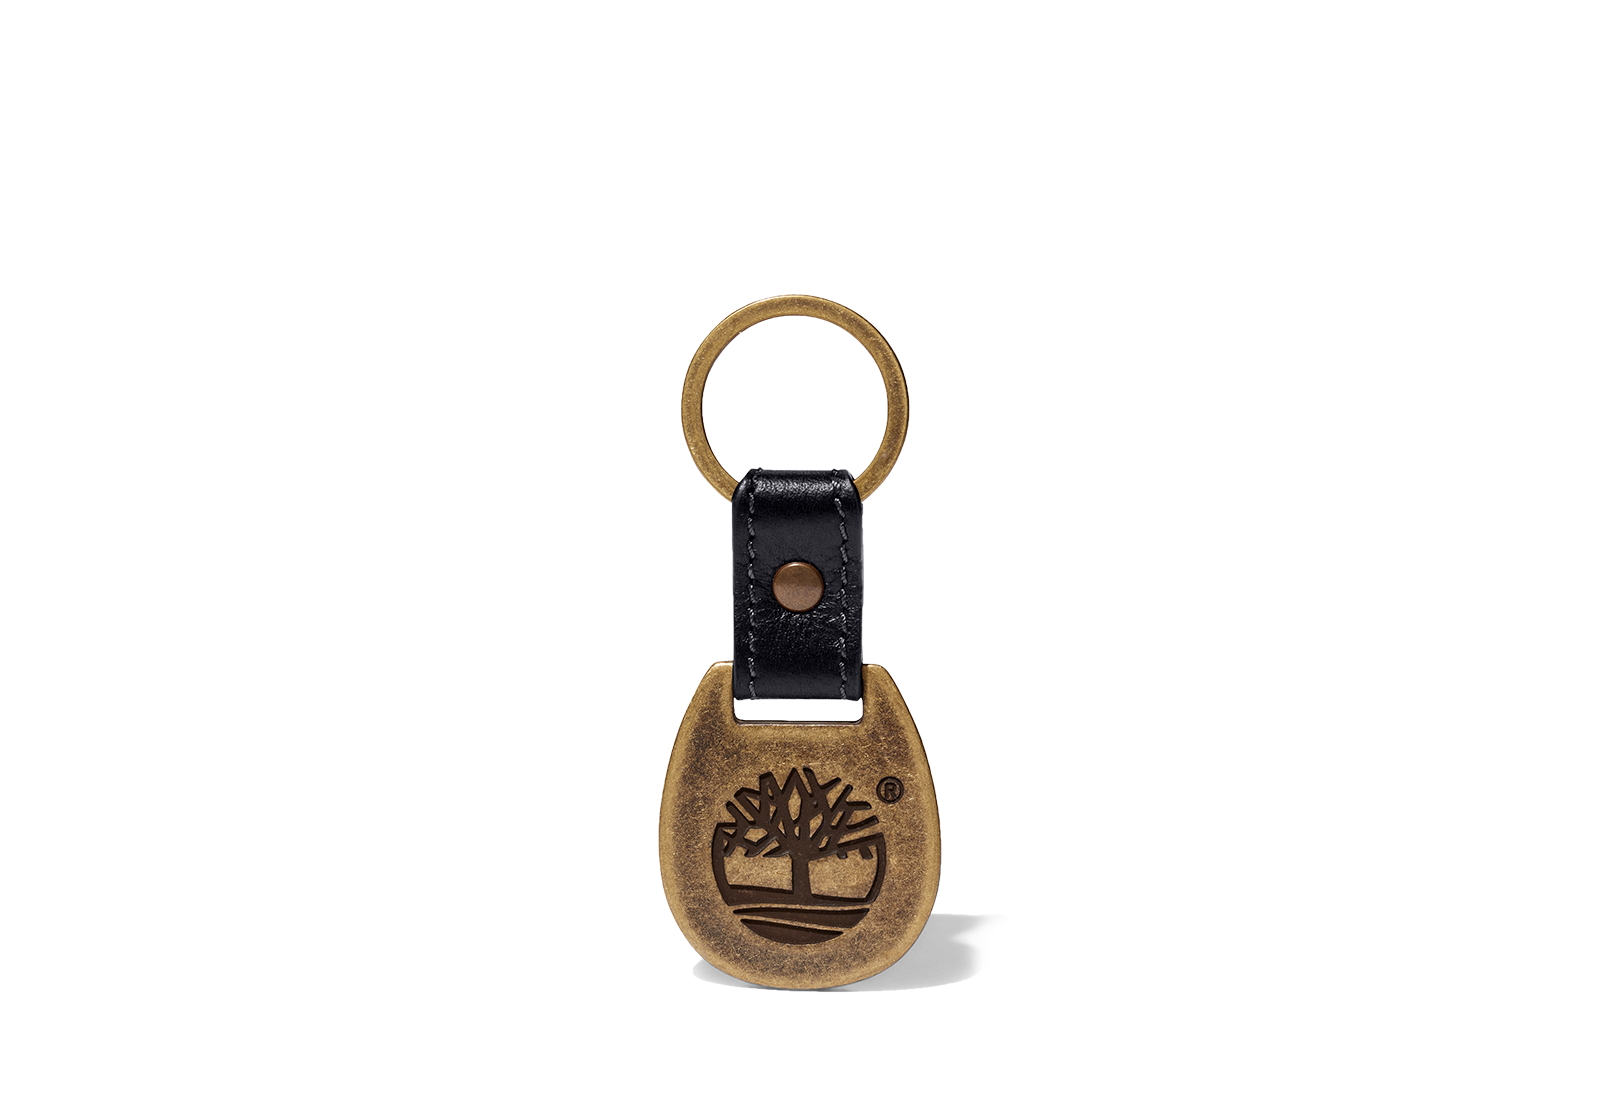 Timberland Doplnky Credit Card And Key Ring Gift Set